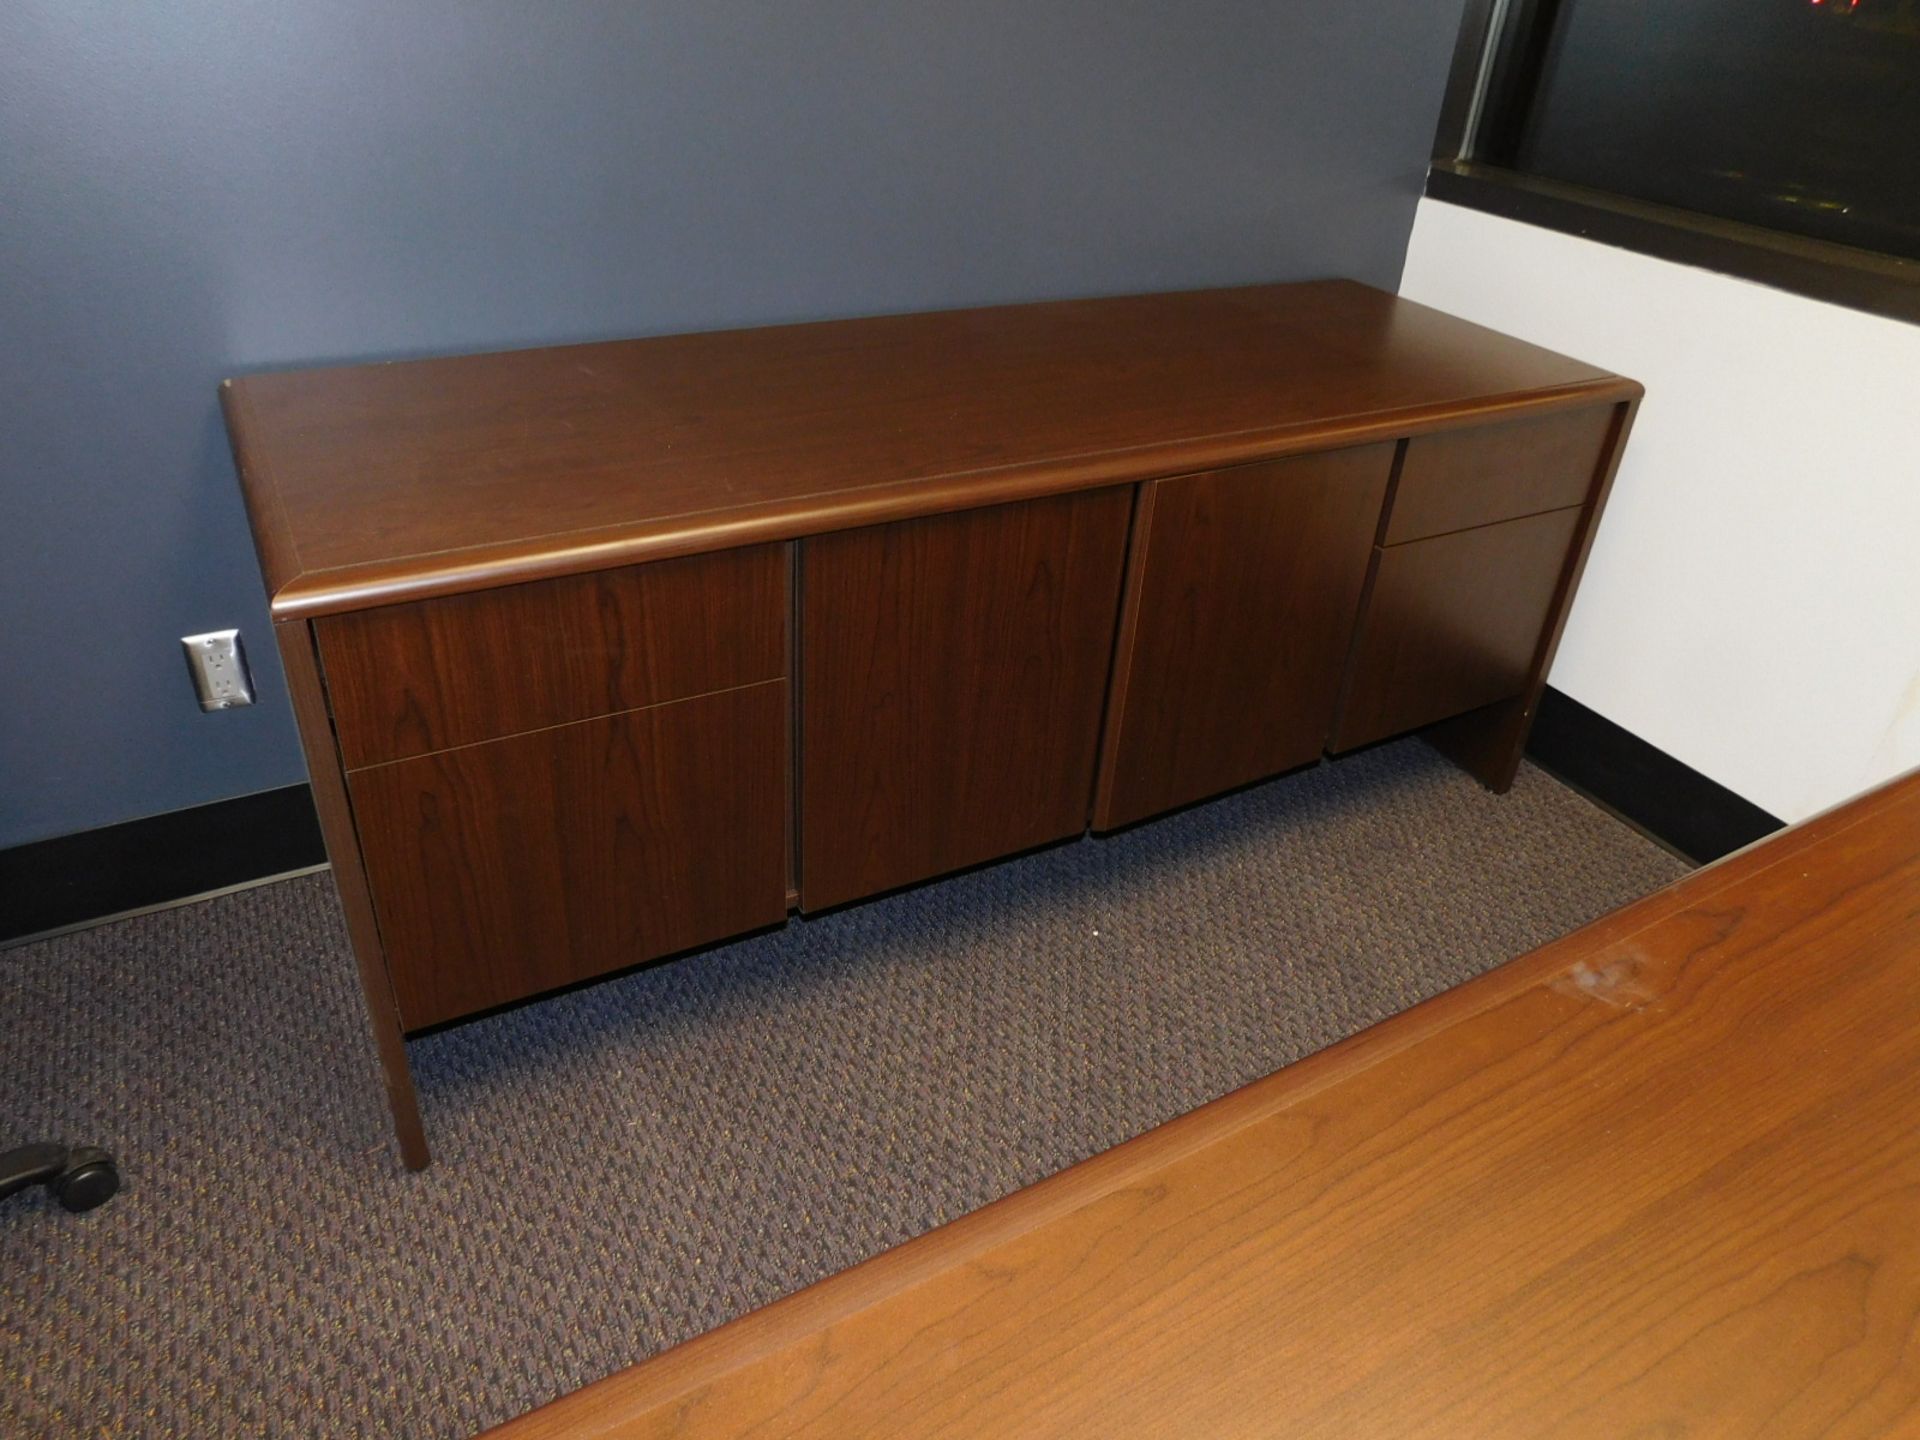 KIMBALL ARROWOOD 72" CREDENZA IN SUITE WITH THE ABOVE